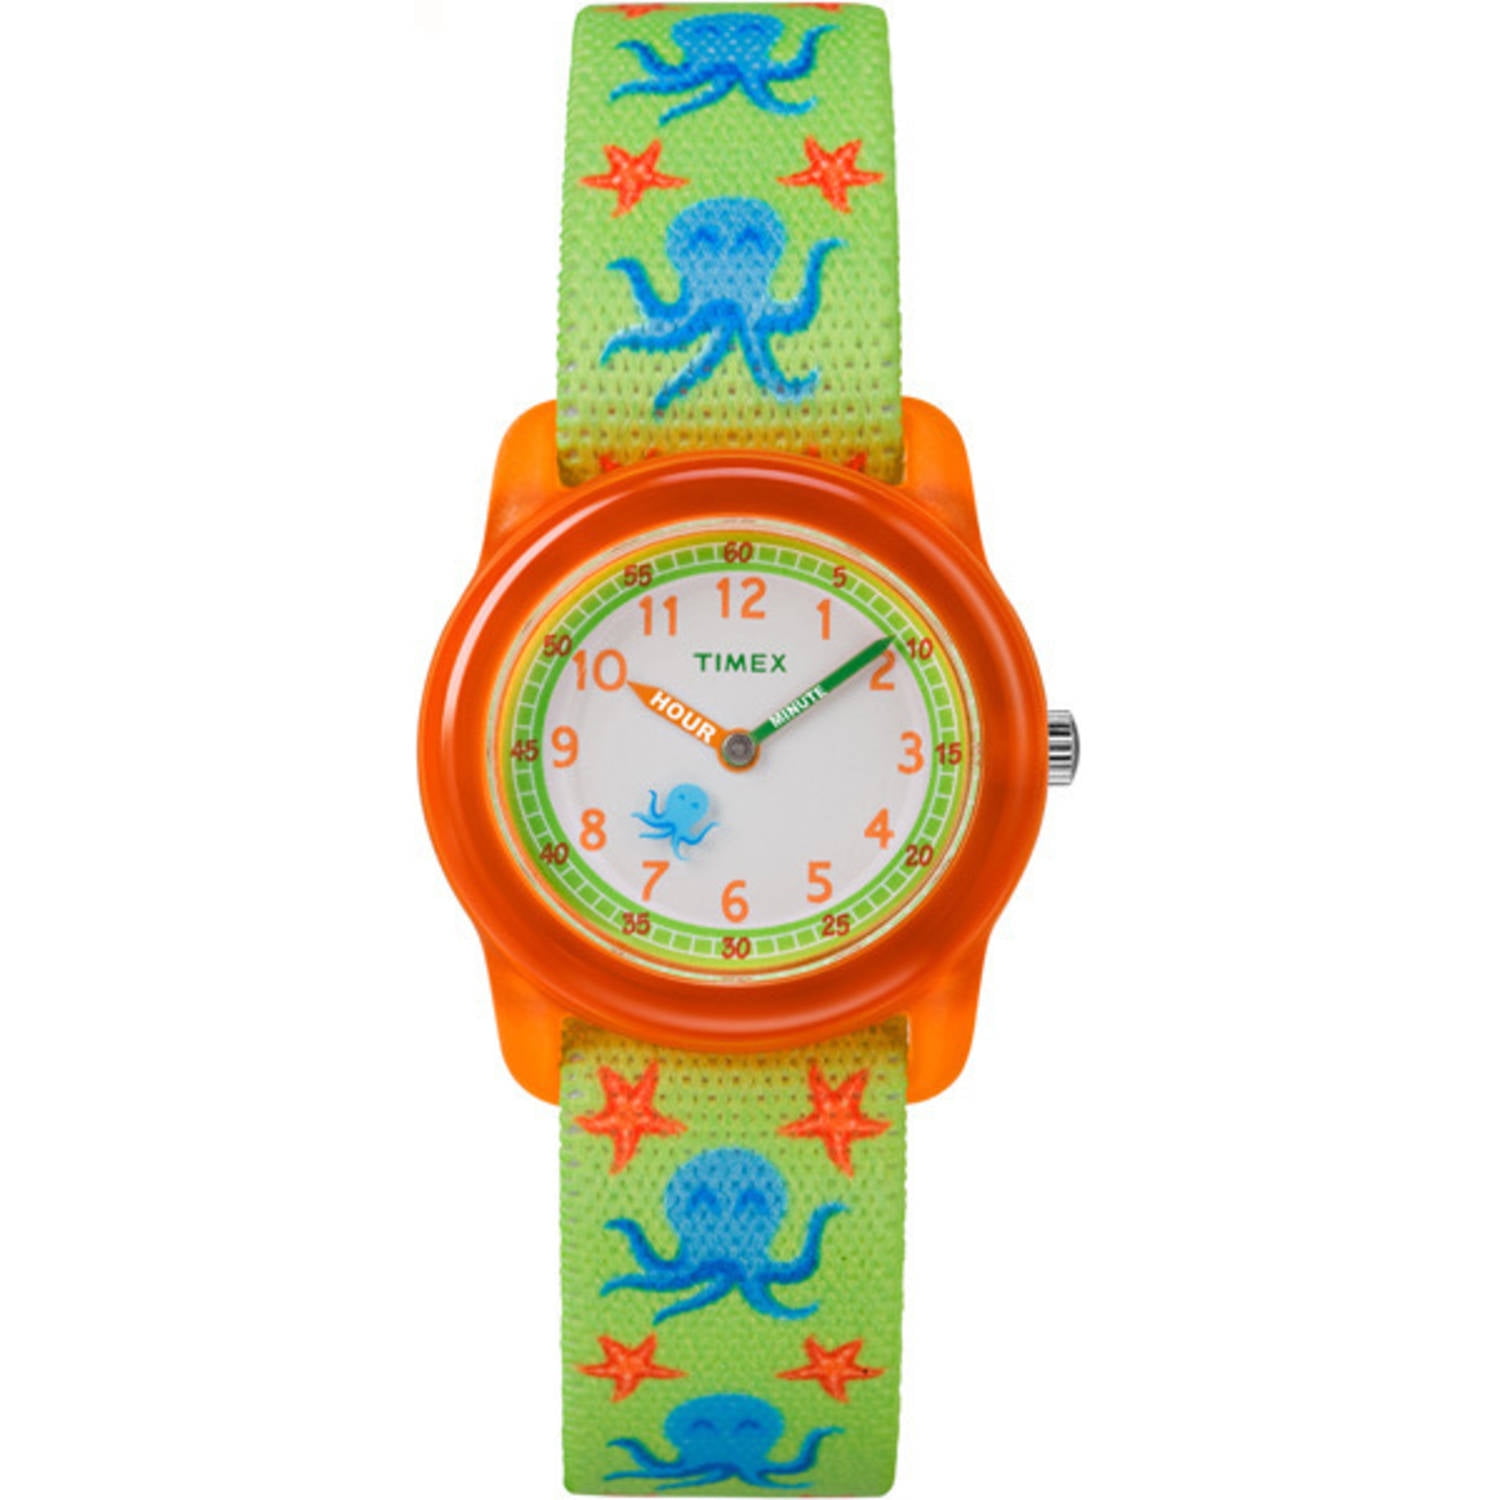 Transitioning Back into School with Help from the Octopus Watch!